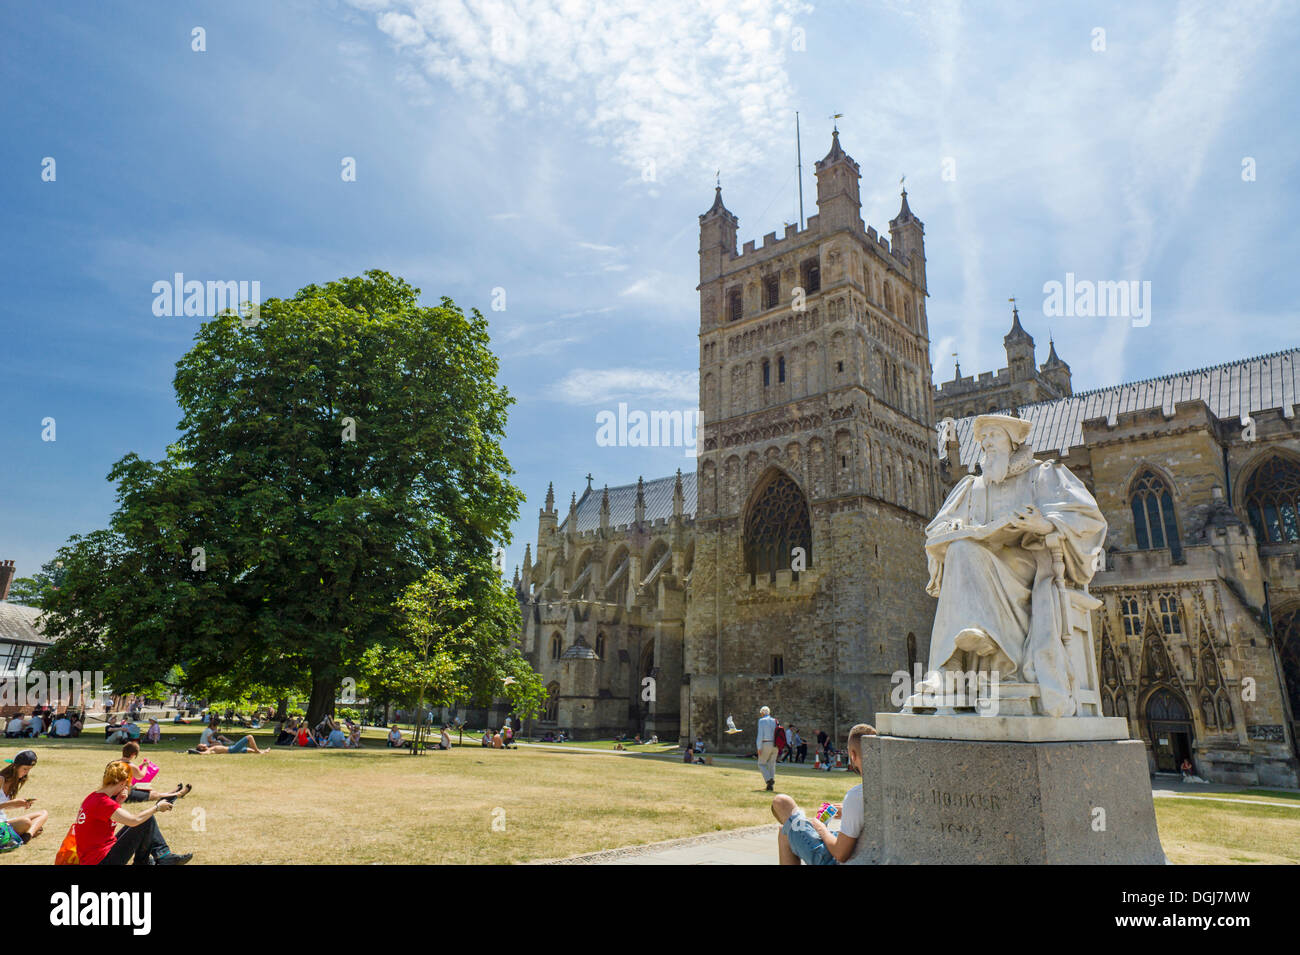 Statue of Richard Hooker in front of Exeter Cathedral. Stock Photo